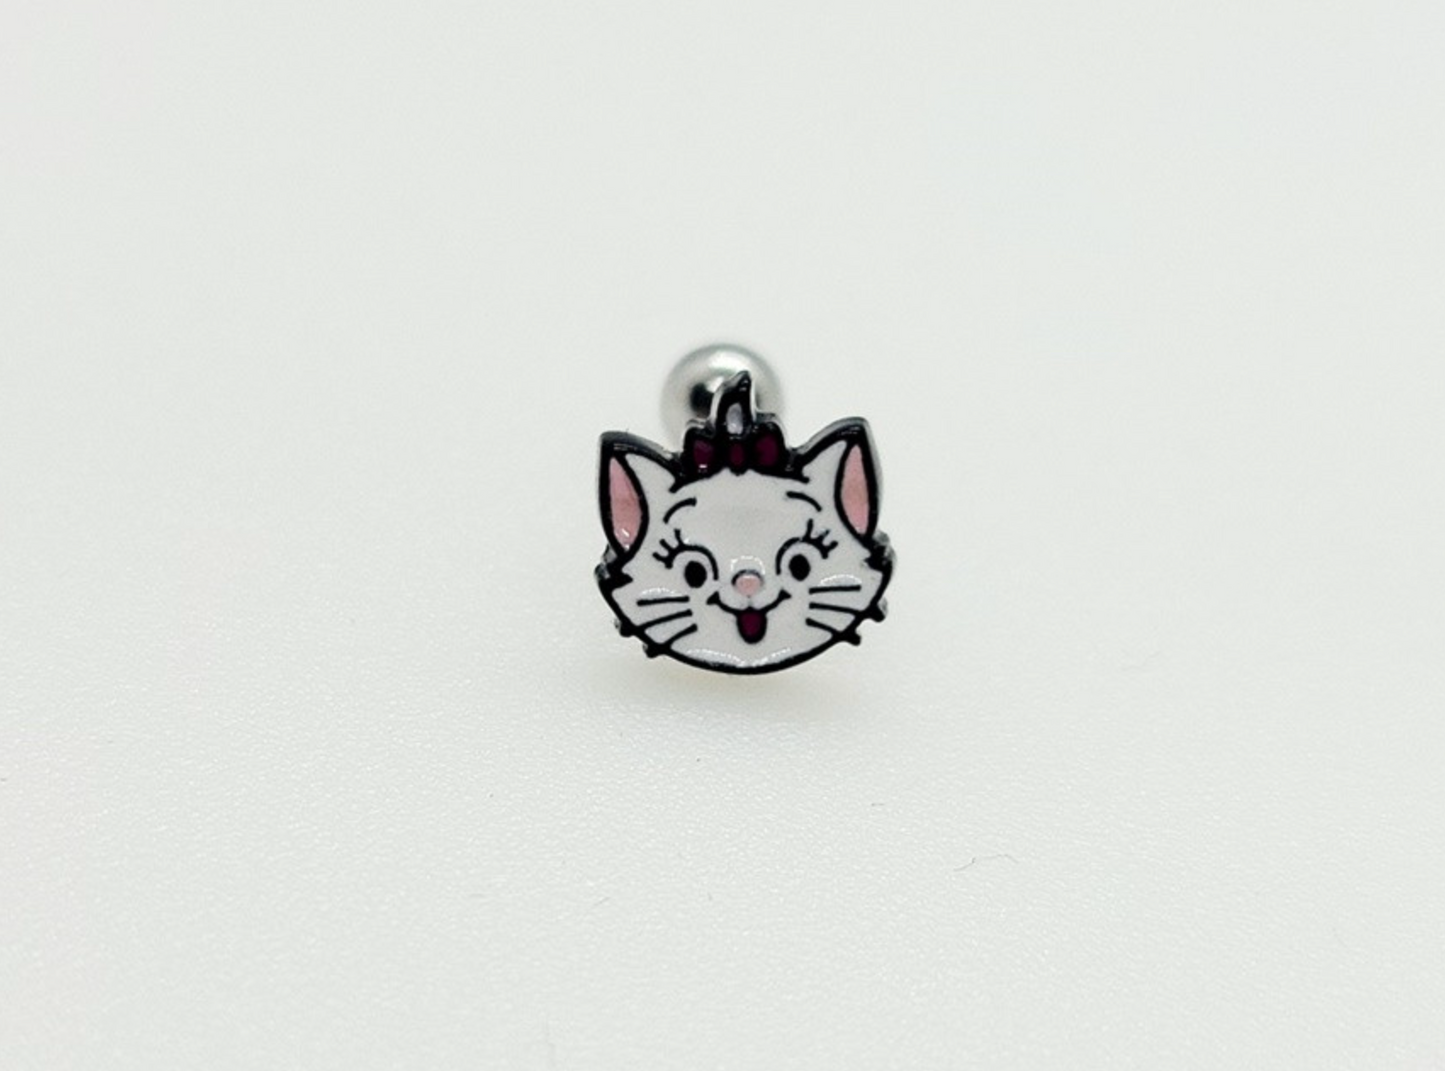 Cute Disney characters Marie cat, Dumbo crew back Barbells Ear Piercing, Surgical Steel cartilage stud, helix stud, tragus conch